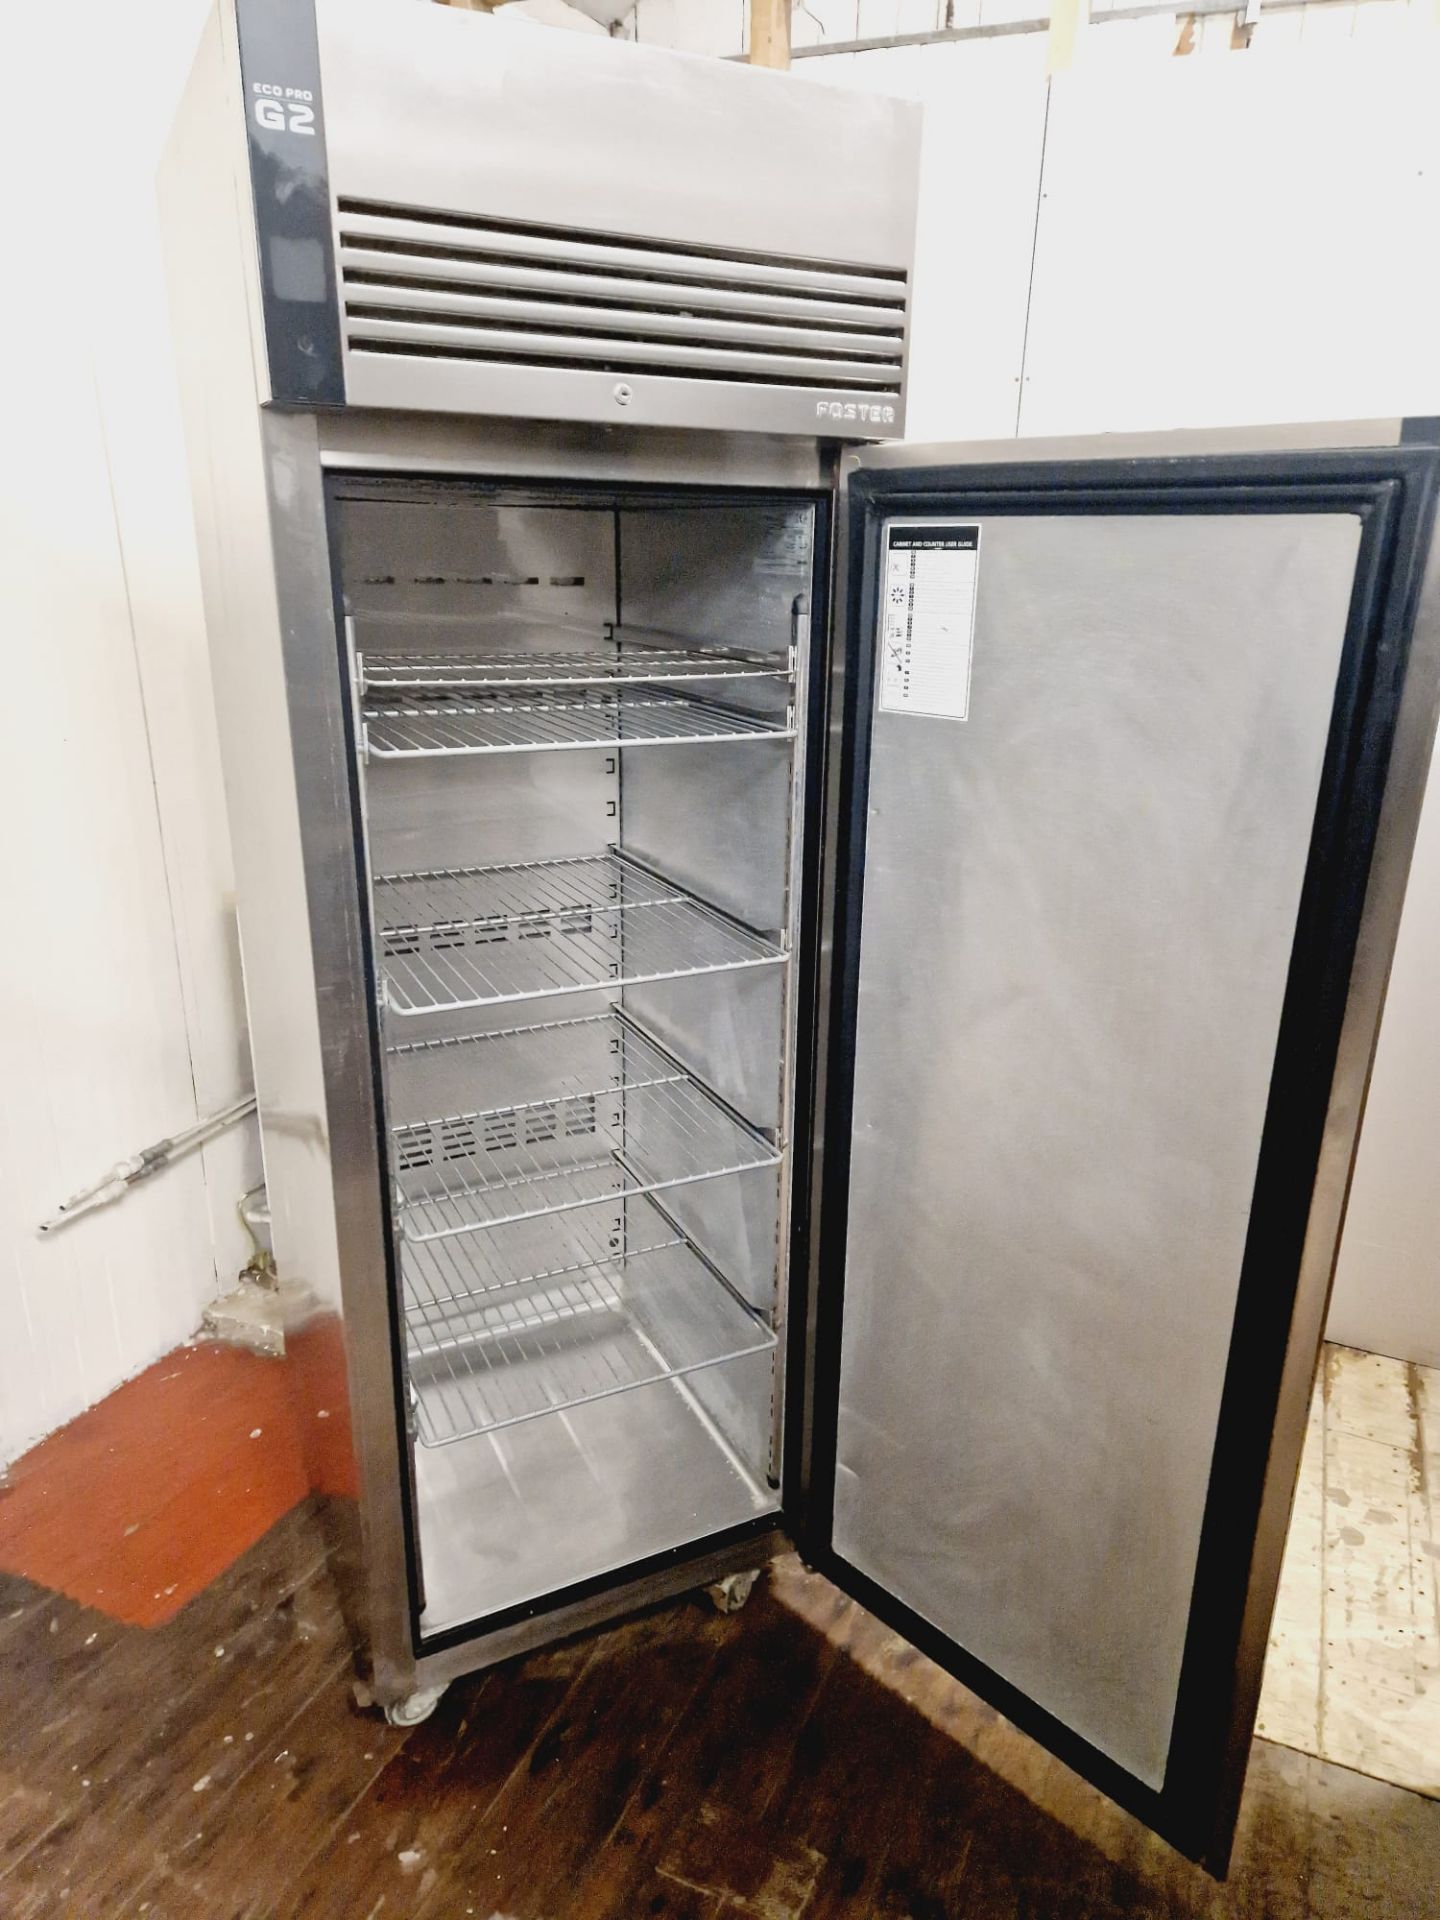 FOSTER G2 UPRIGHT FRIDGE - FULLY WORKING AND SERVICED - Image 2 of 3